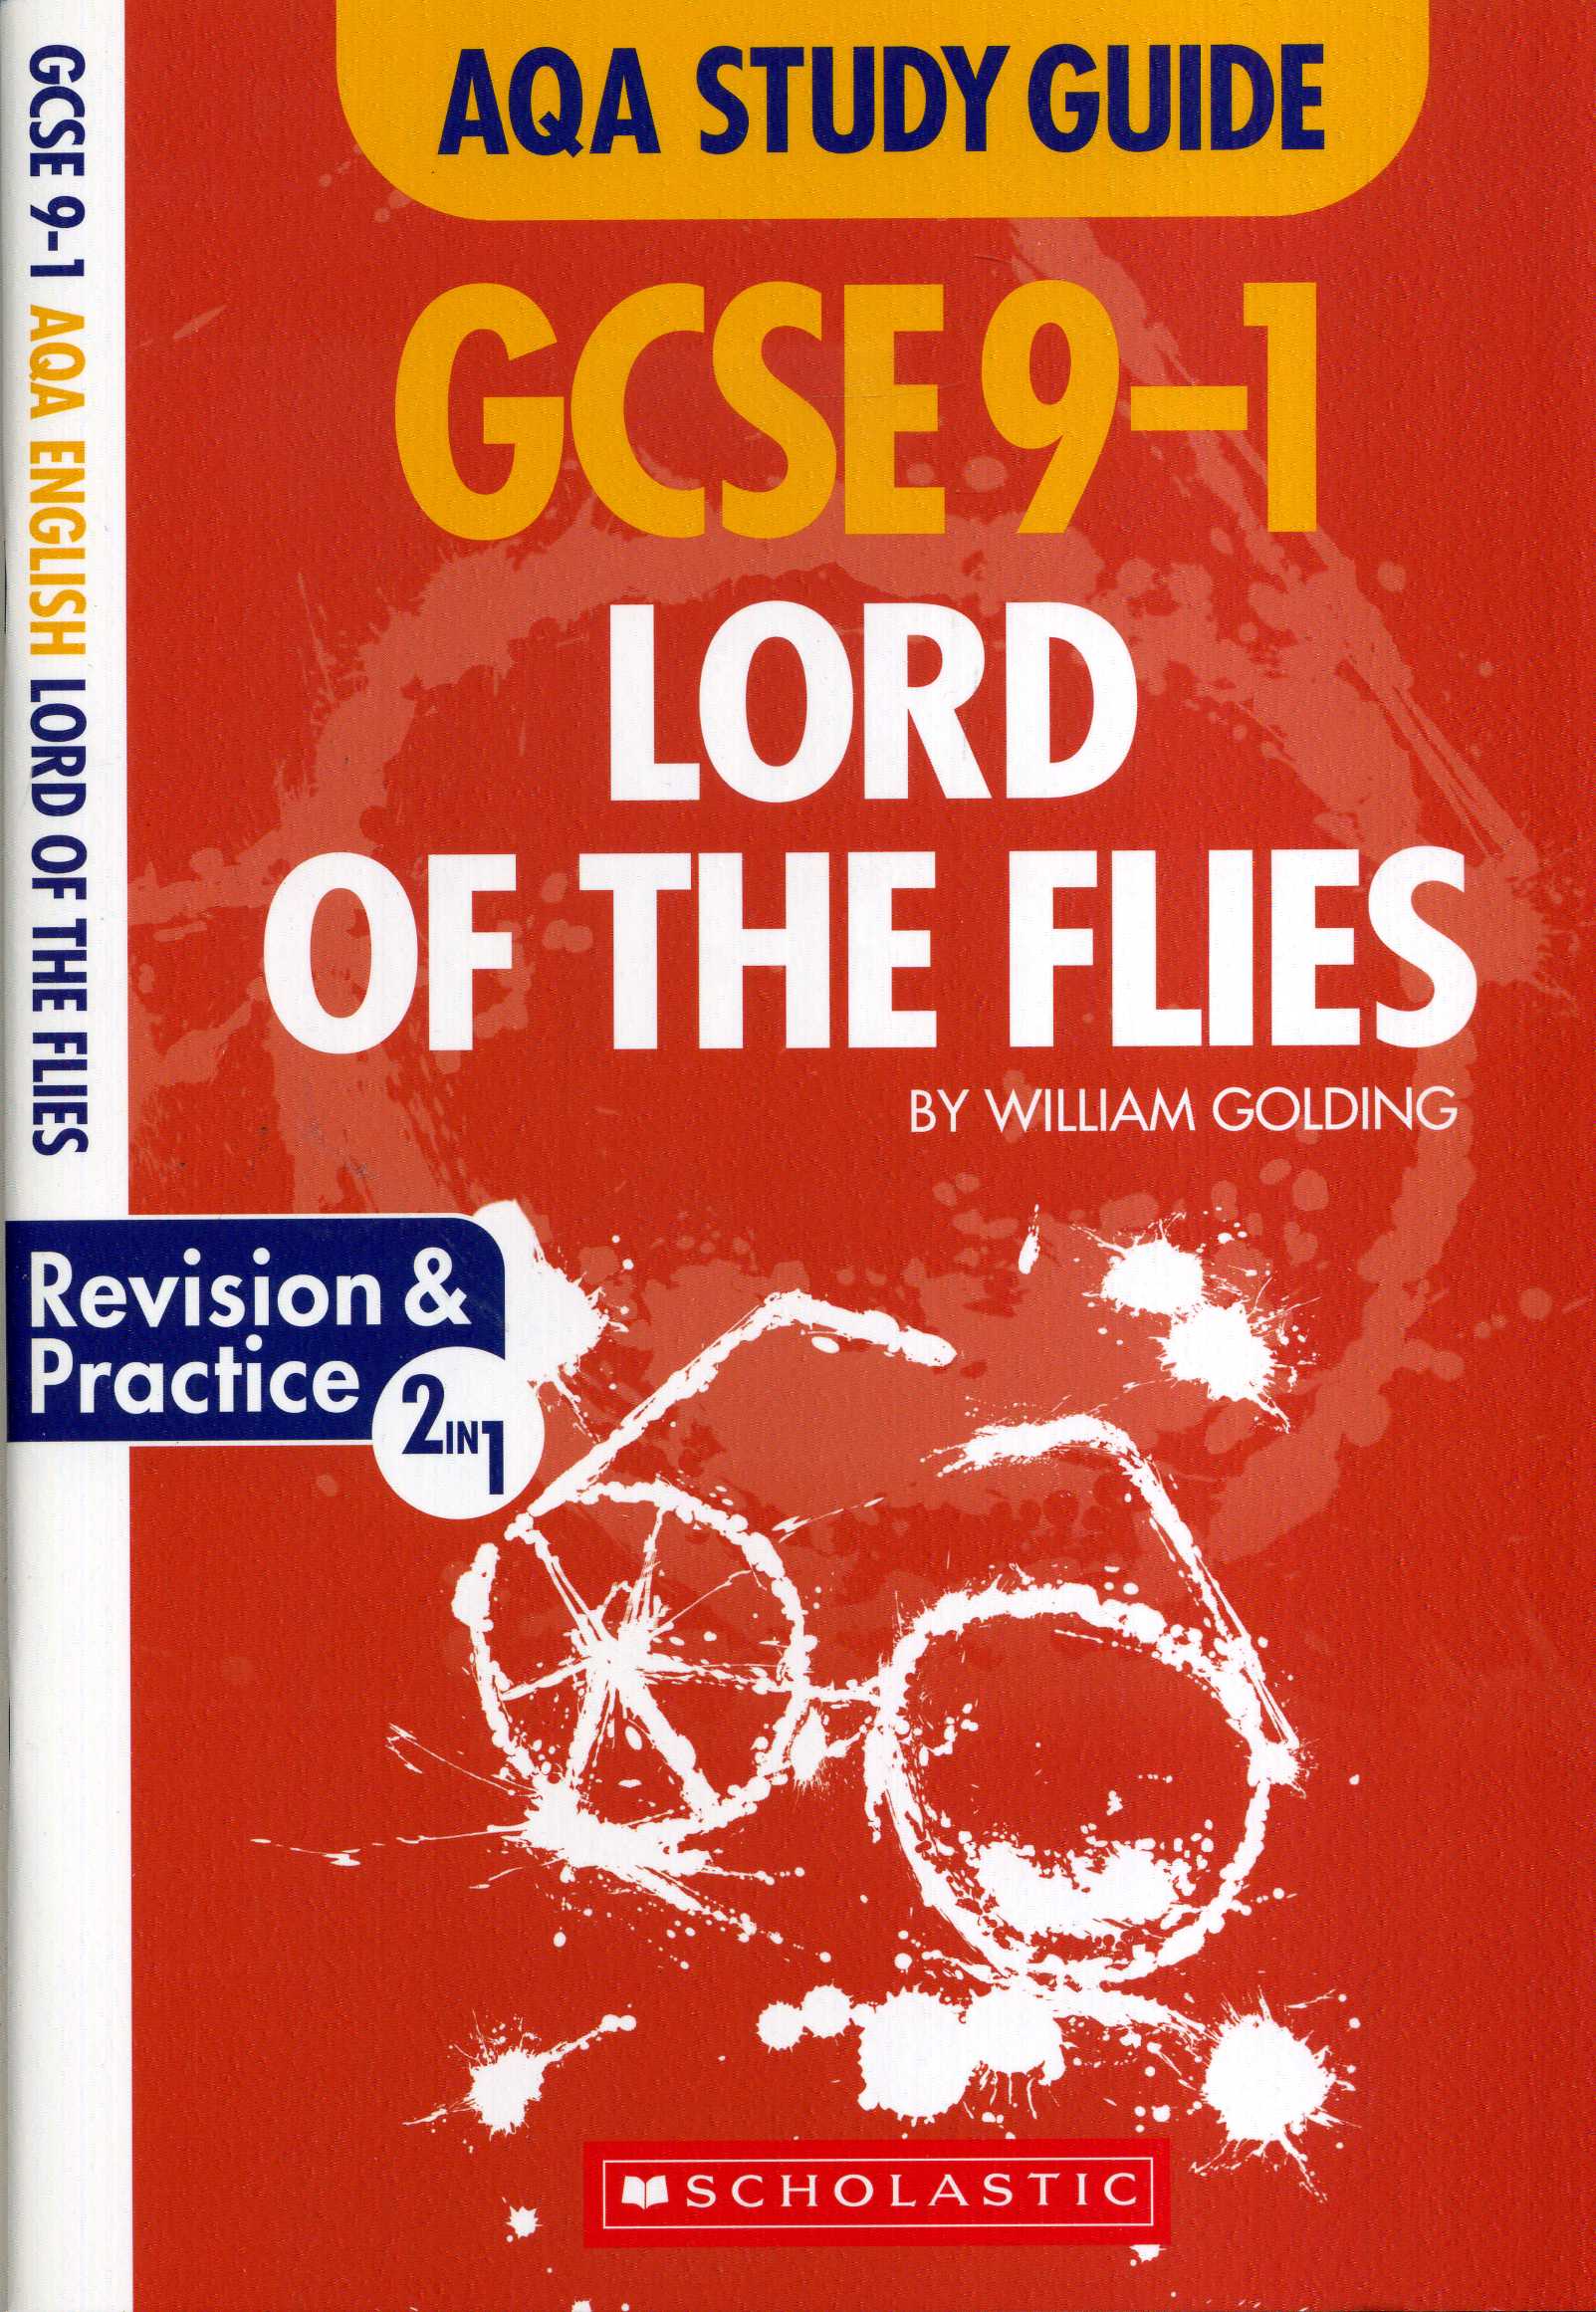 AQA Study Guide: GCSE 9-1 Lord Of The Flies